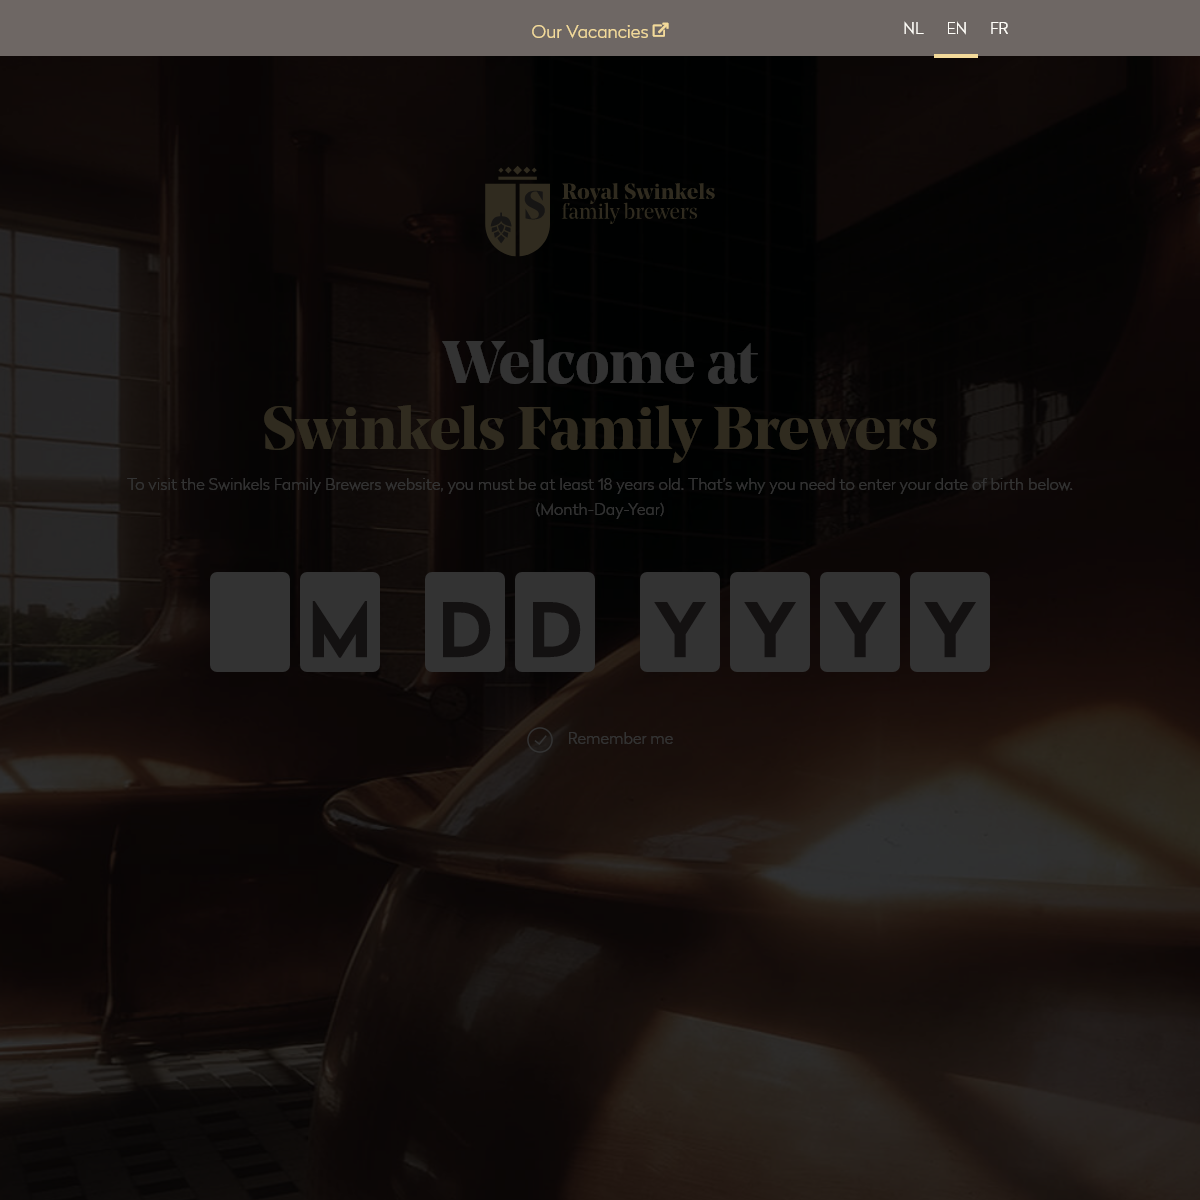 A complete backup of swinkelsfamilybrewers.com